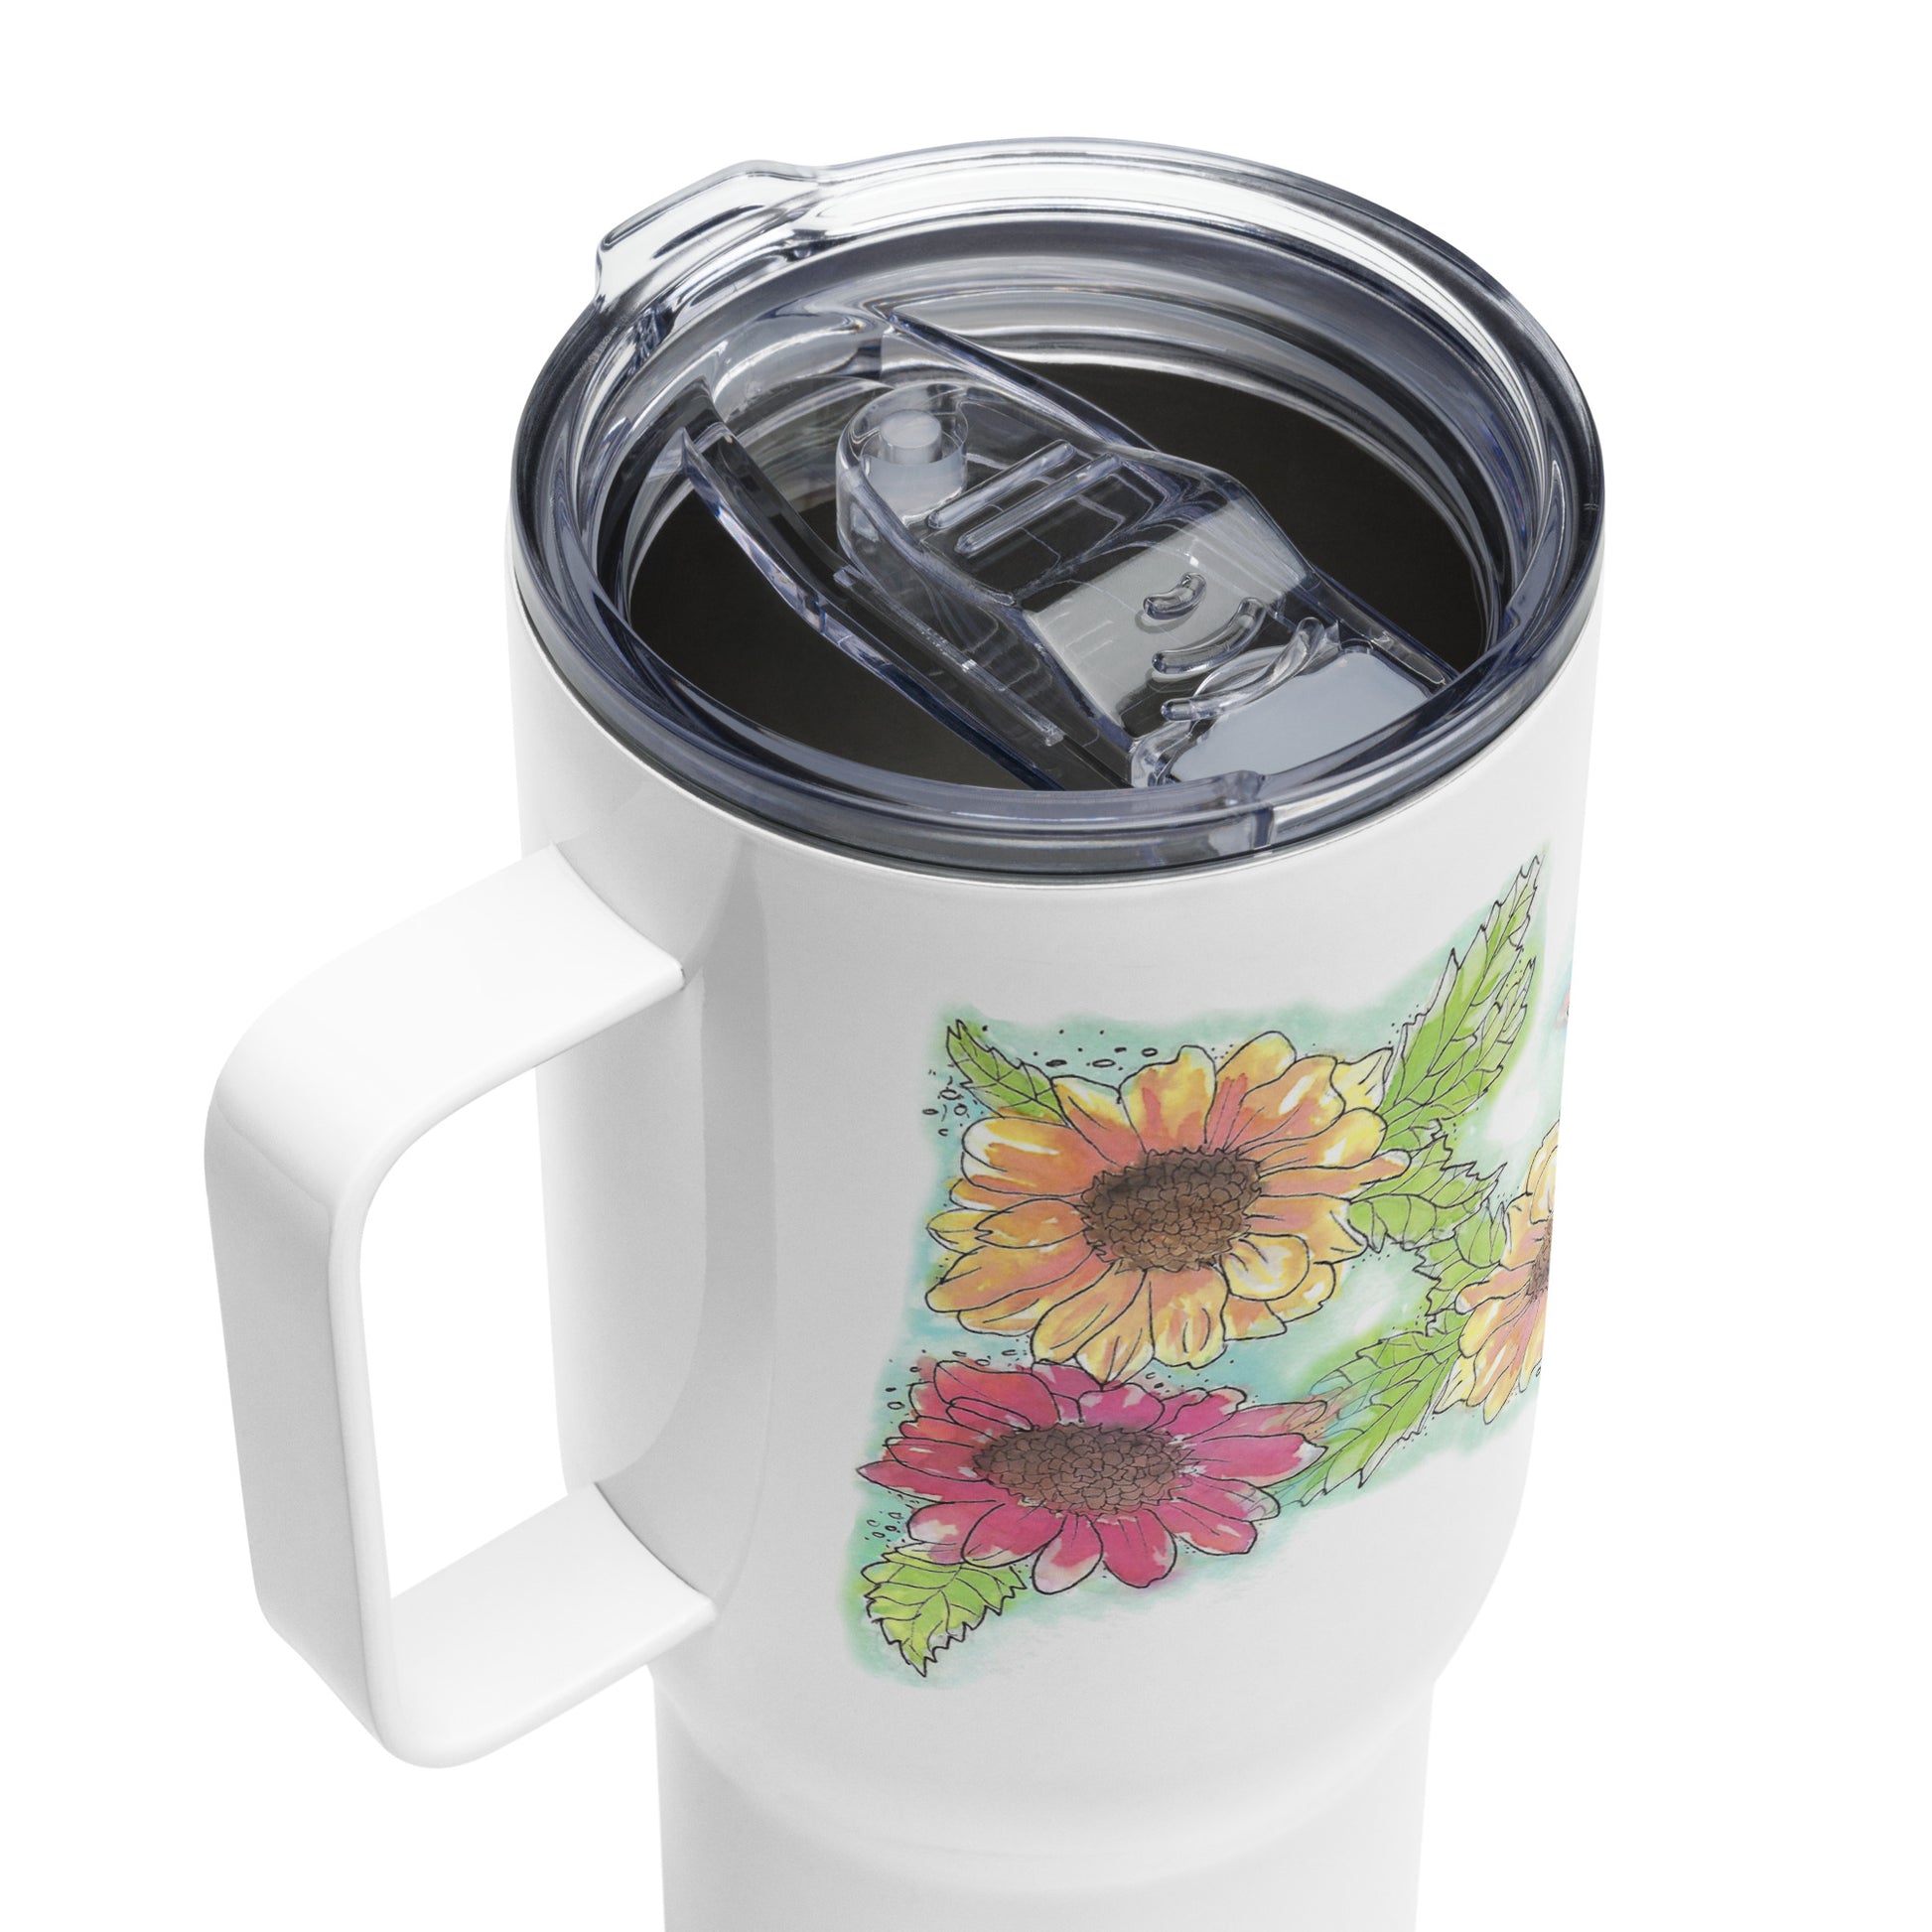 Gerber daisies stainless steel travel mug with handle. Holds 25 ounces and has a BPA-free plastic lid. Detail view of lid.